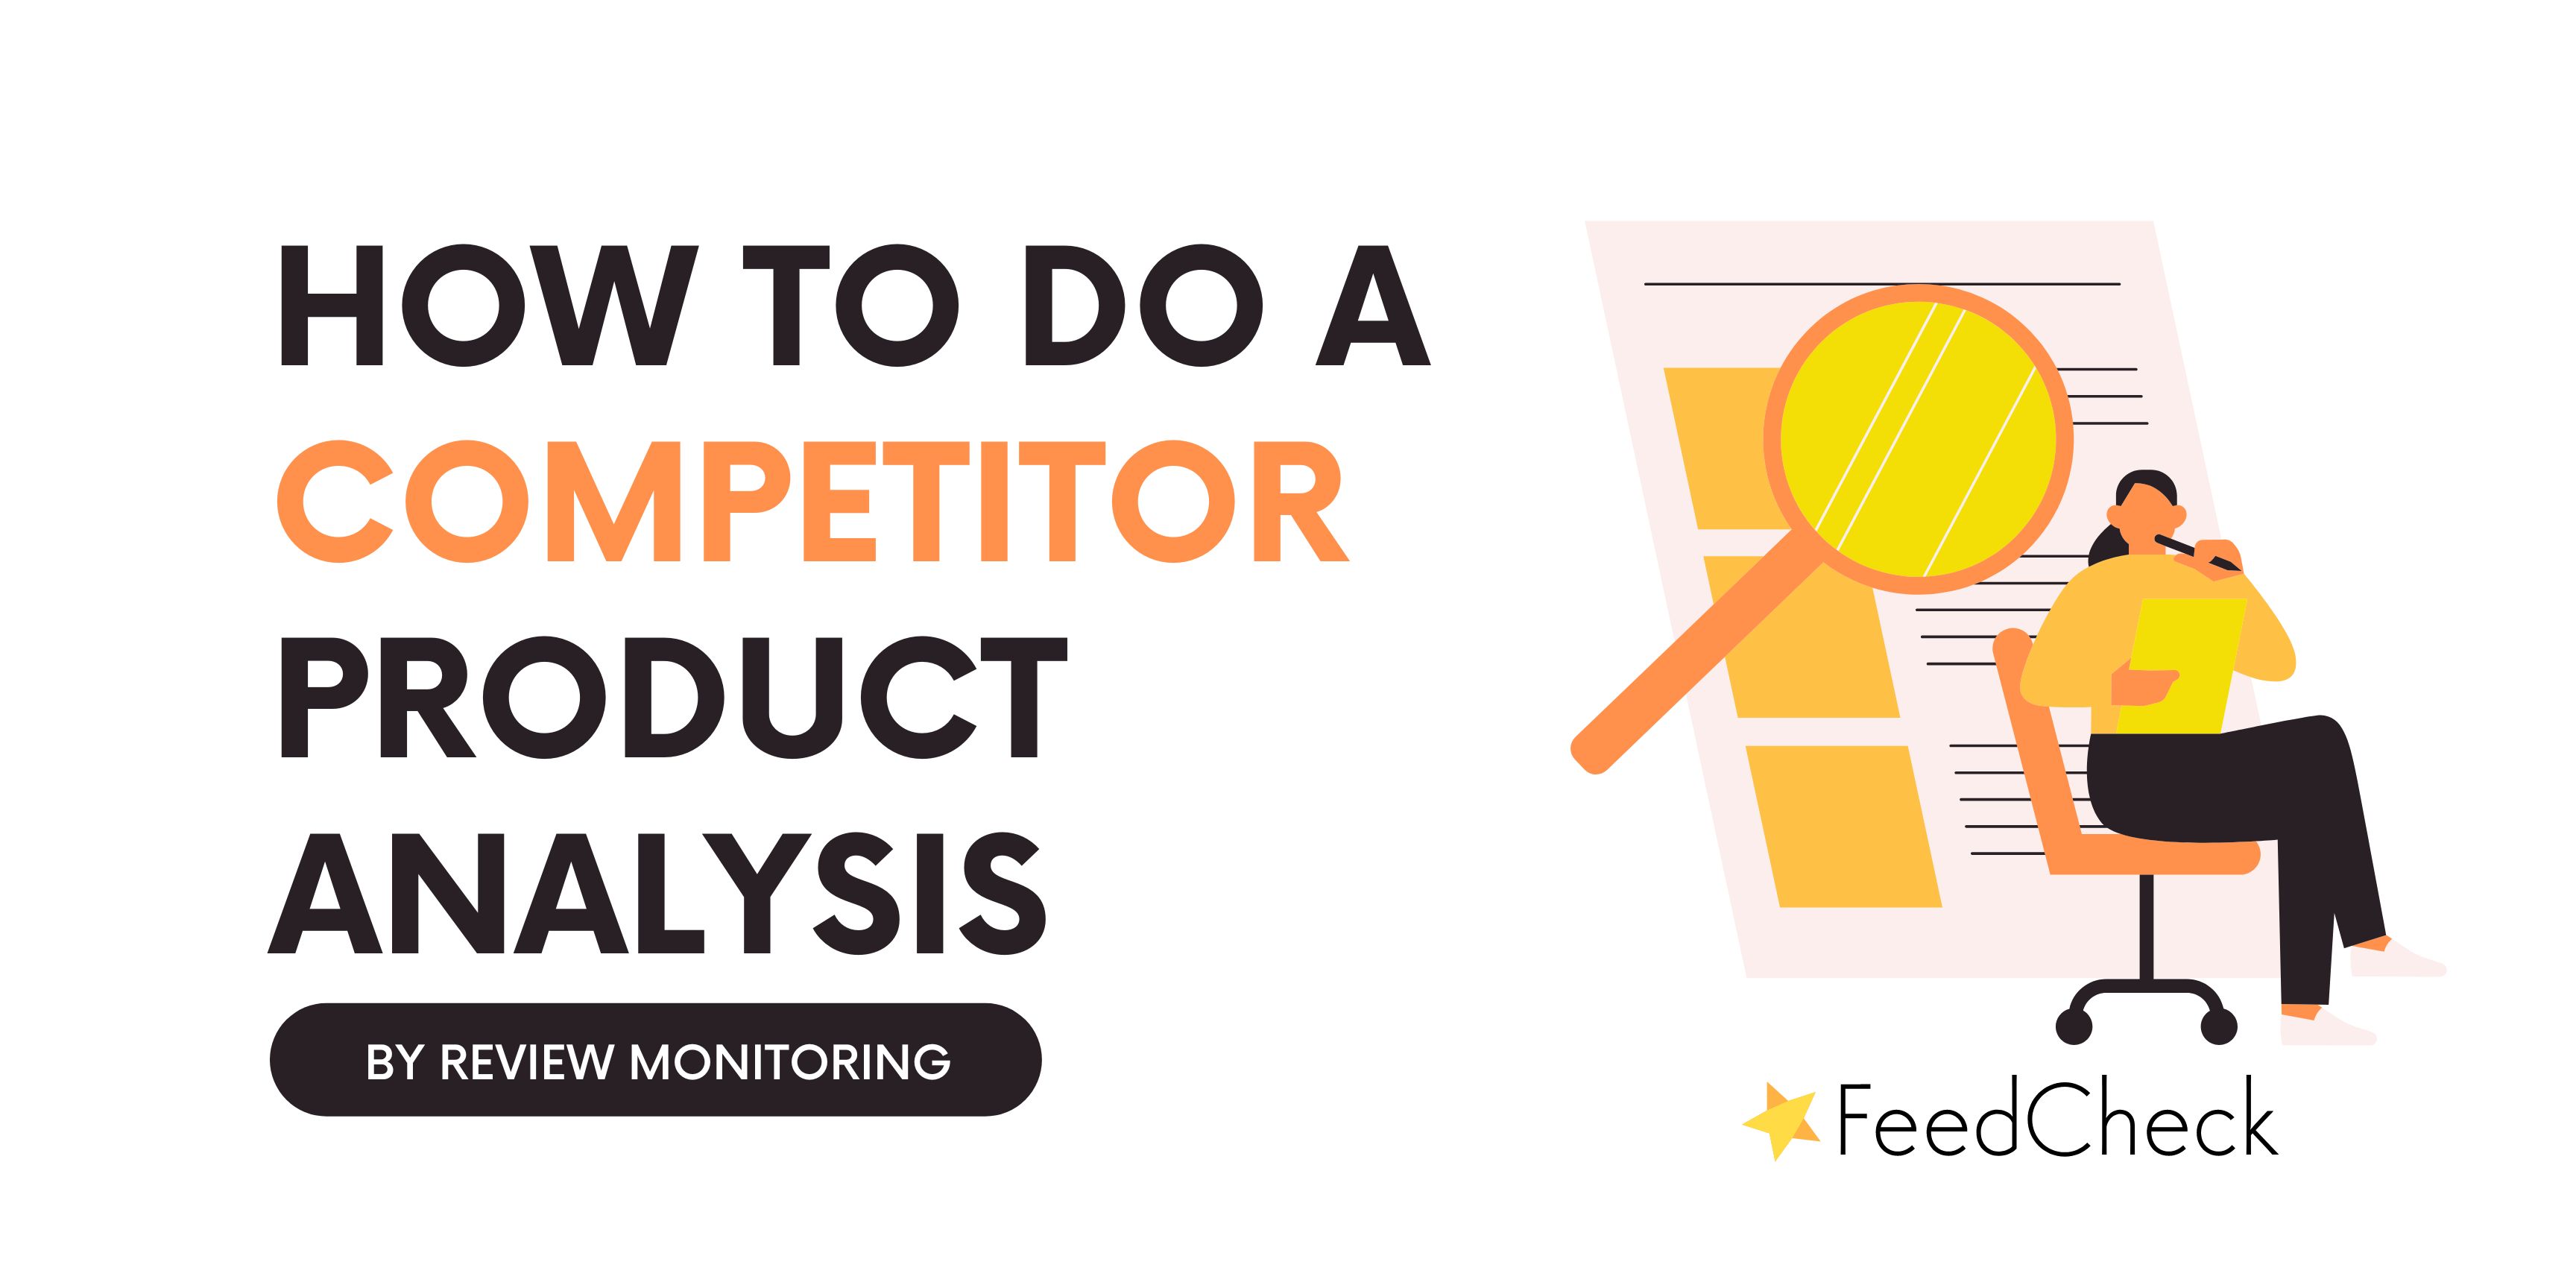 How to do a competitor product analysis by review monitoring